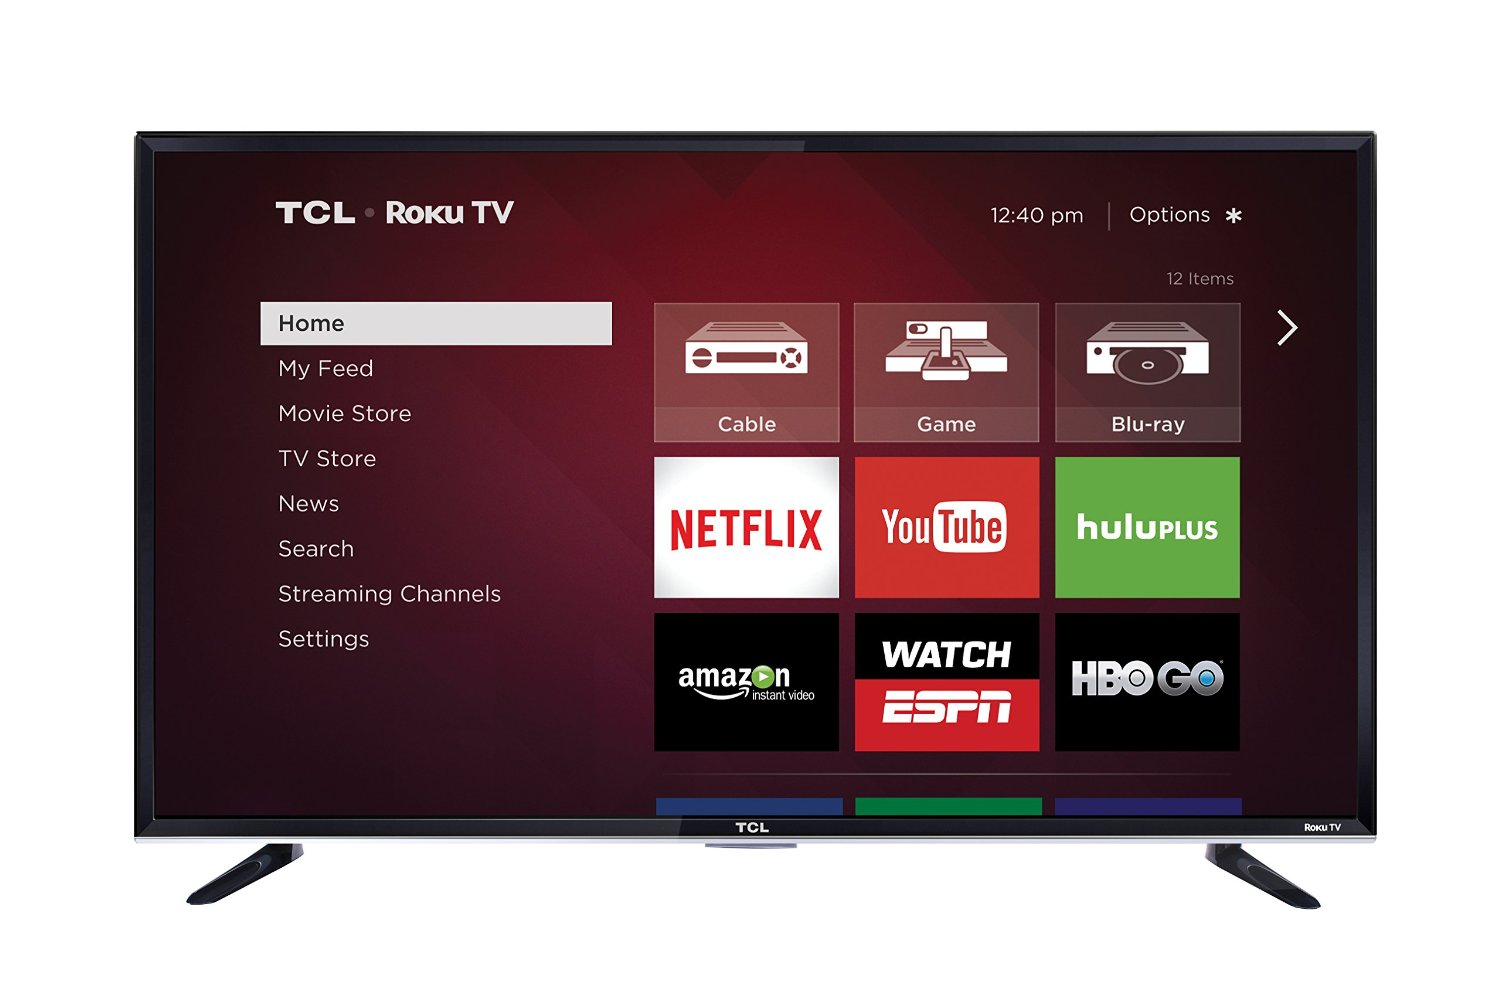 Expect a 50-inch HDTV for $150 as part of the Amazon Black Friday 2015 deals.